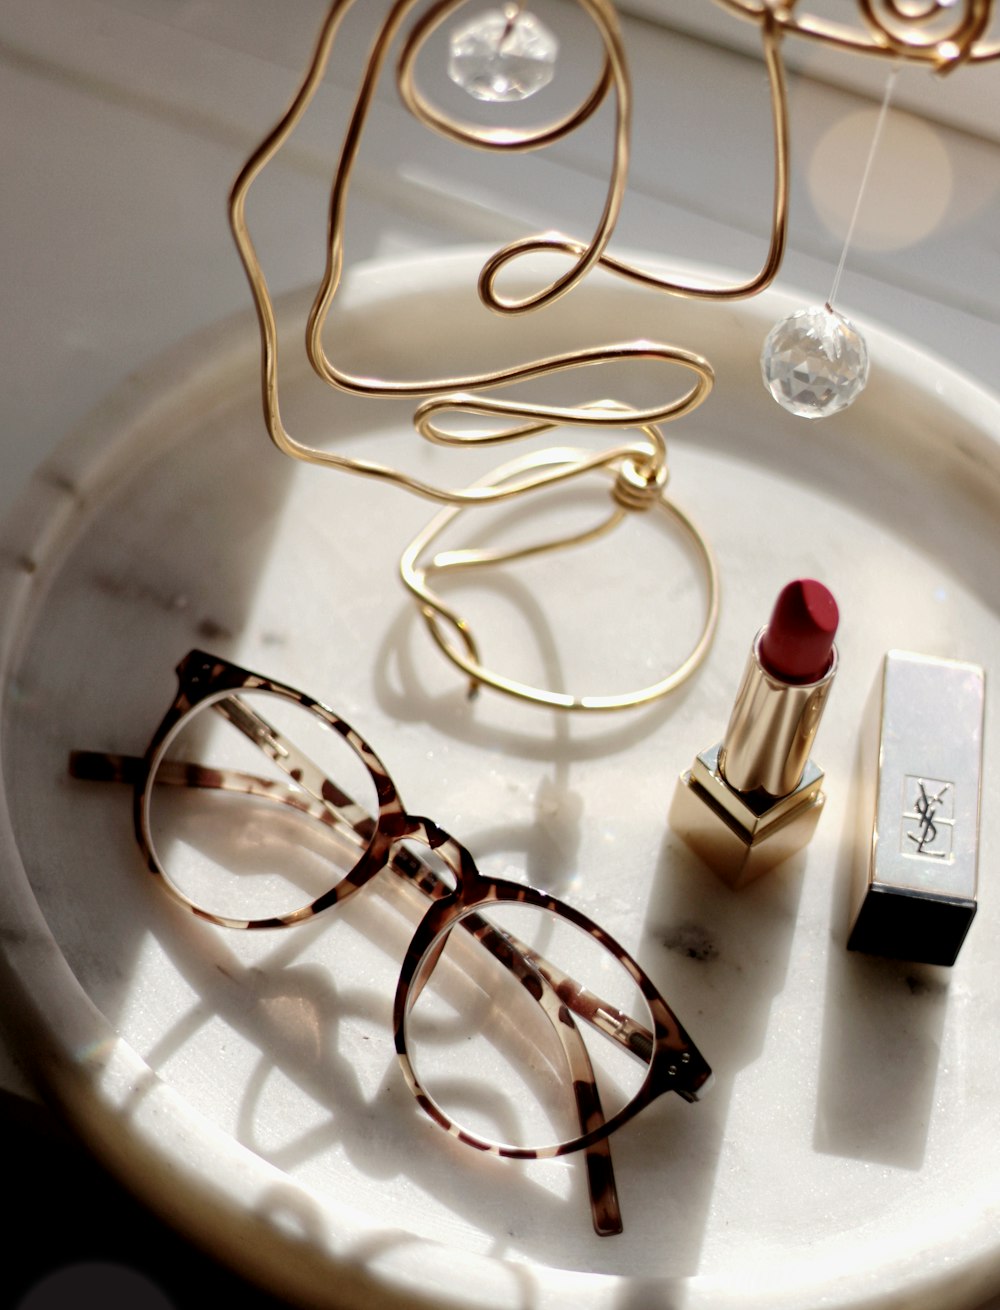 a pair of glasses and a lipstick on a plate